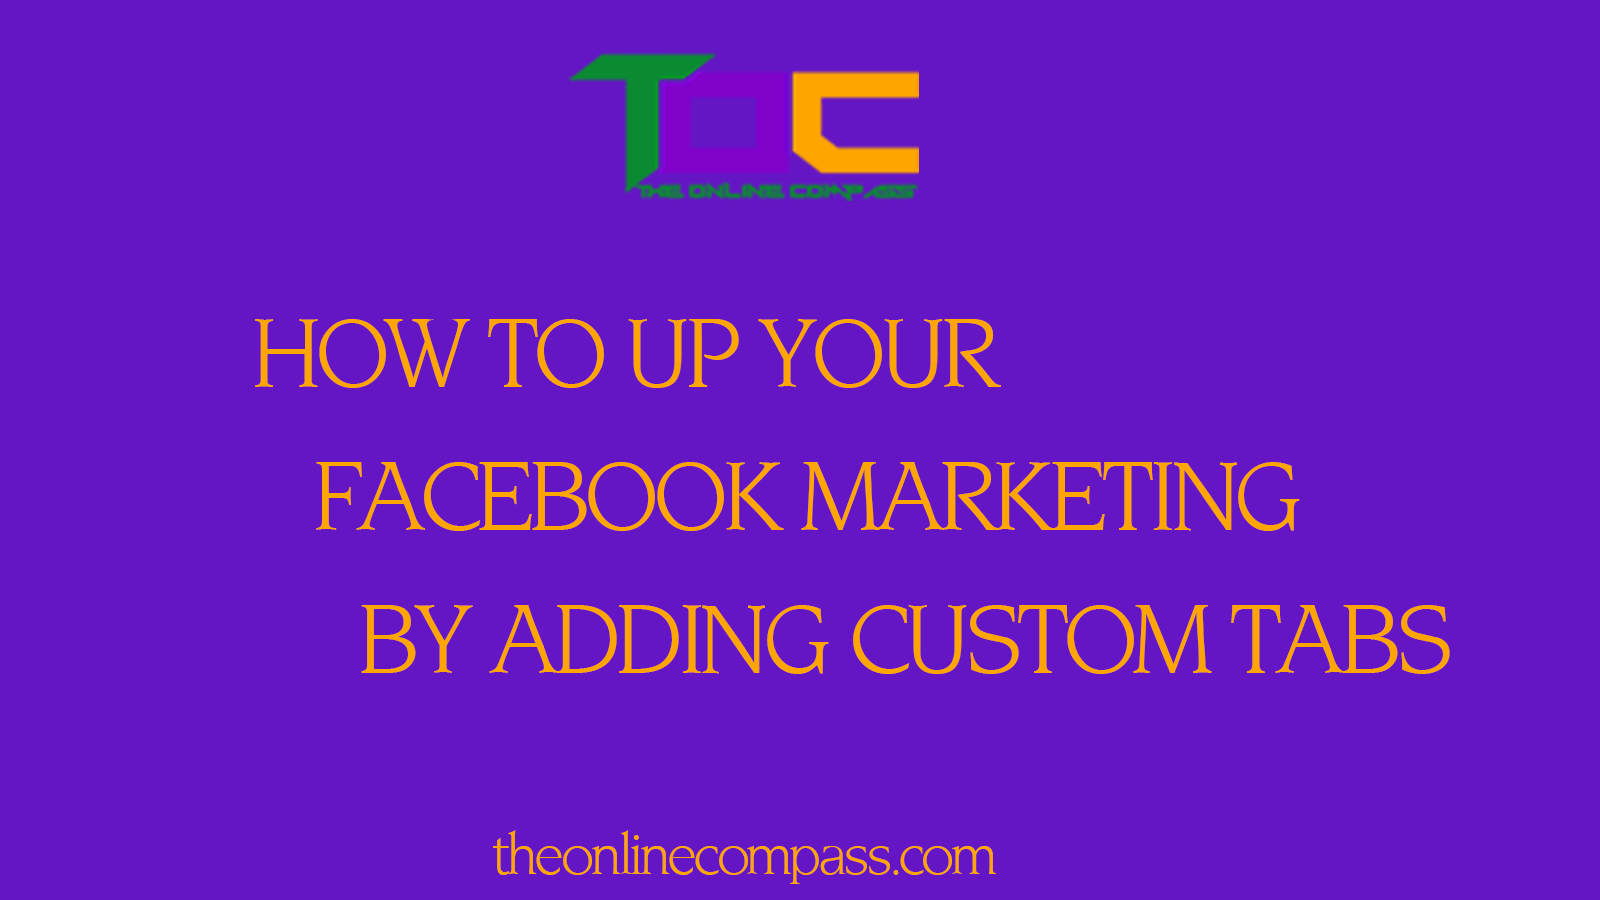 How to set up custom tabs on your Facebook page